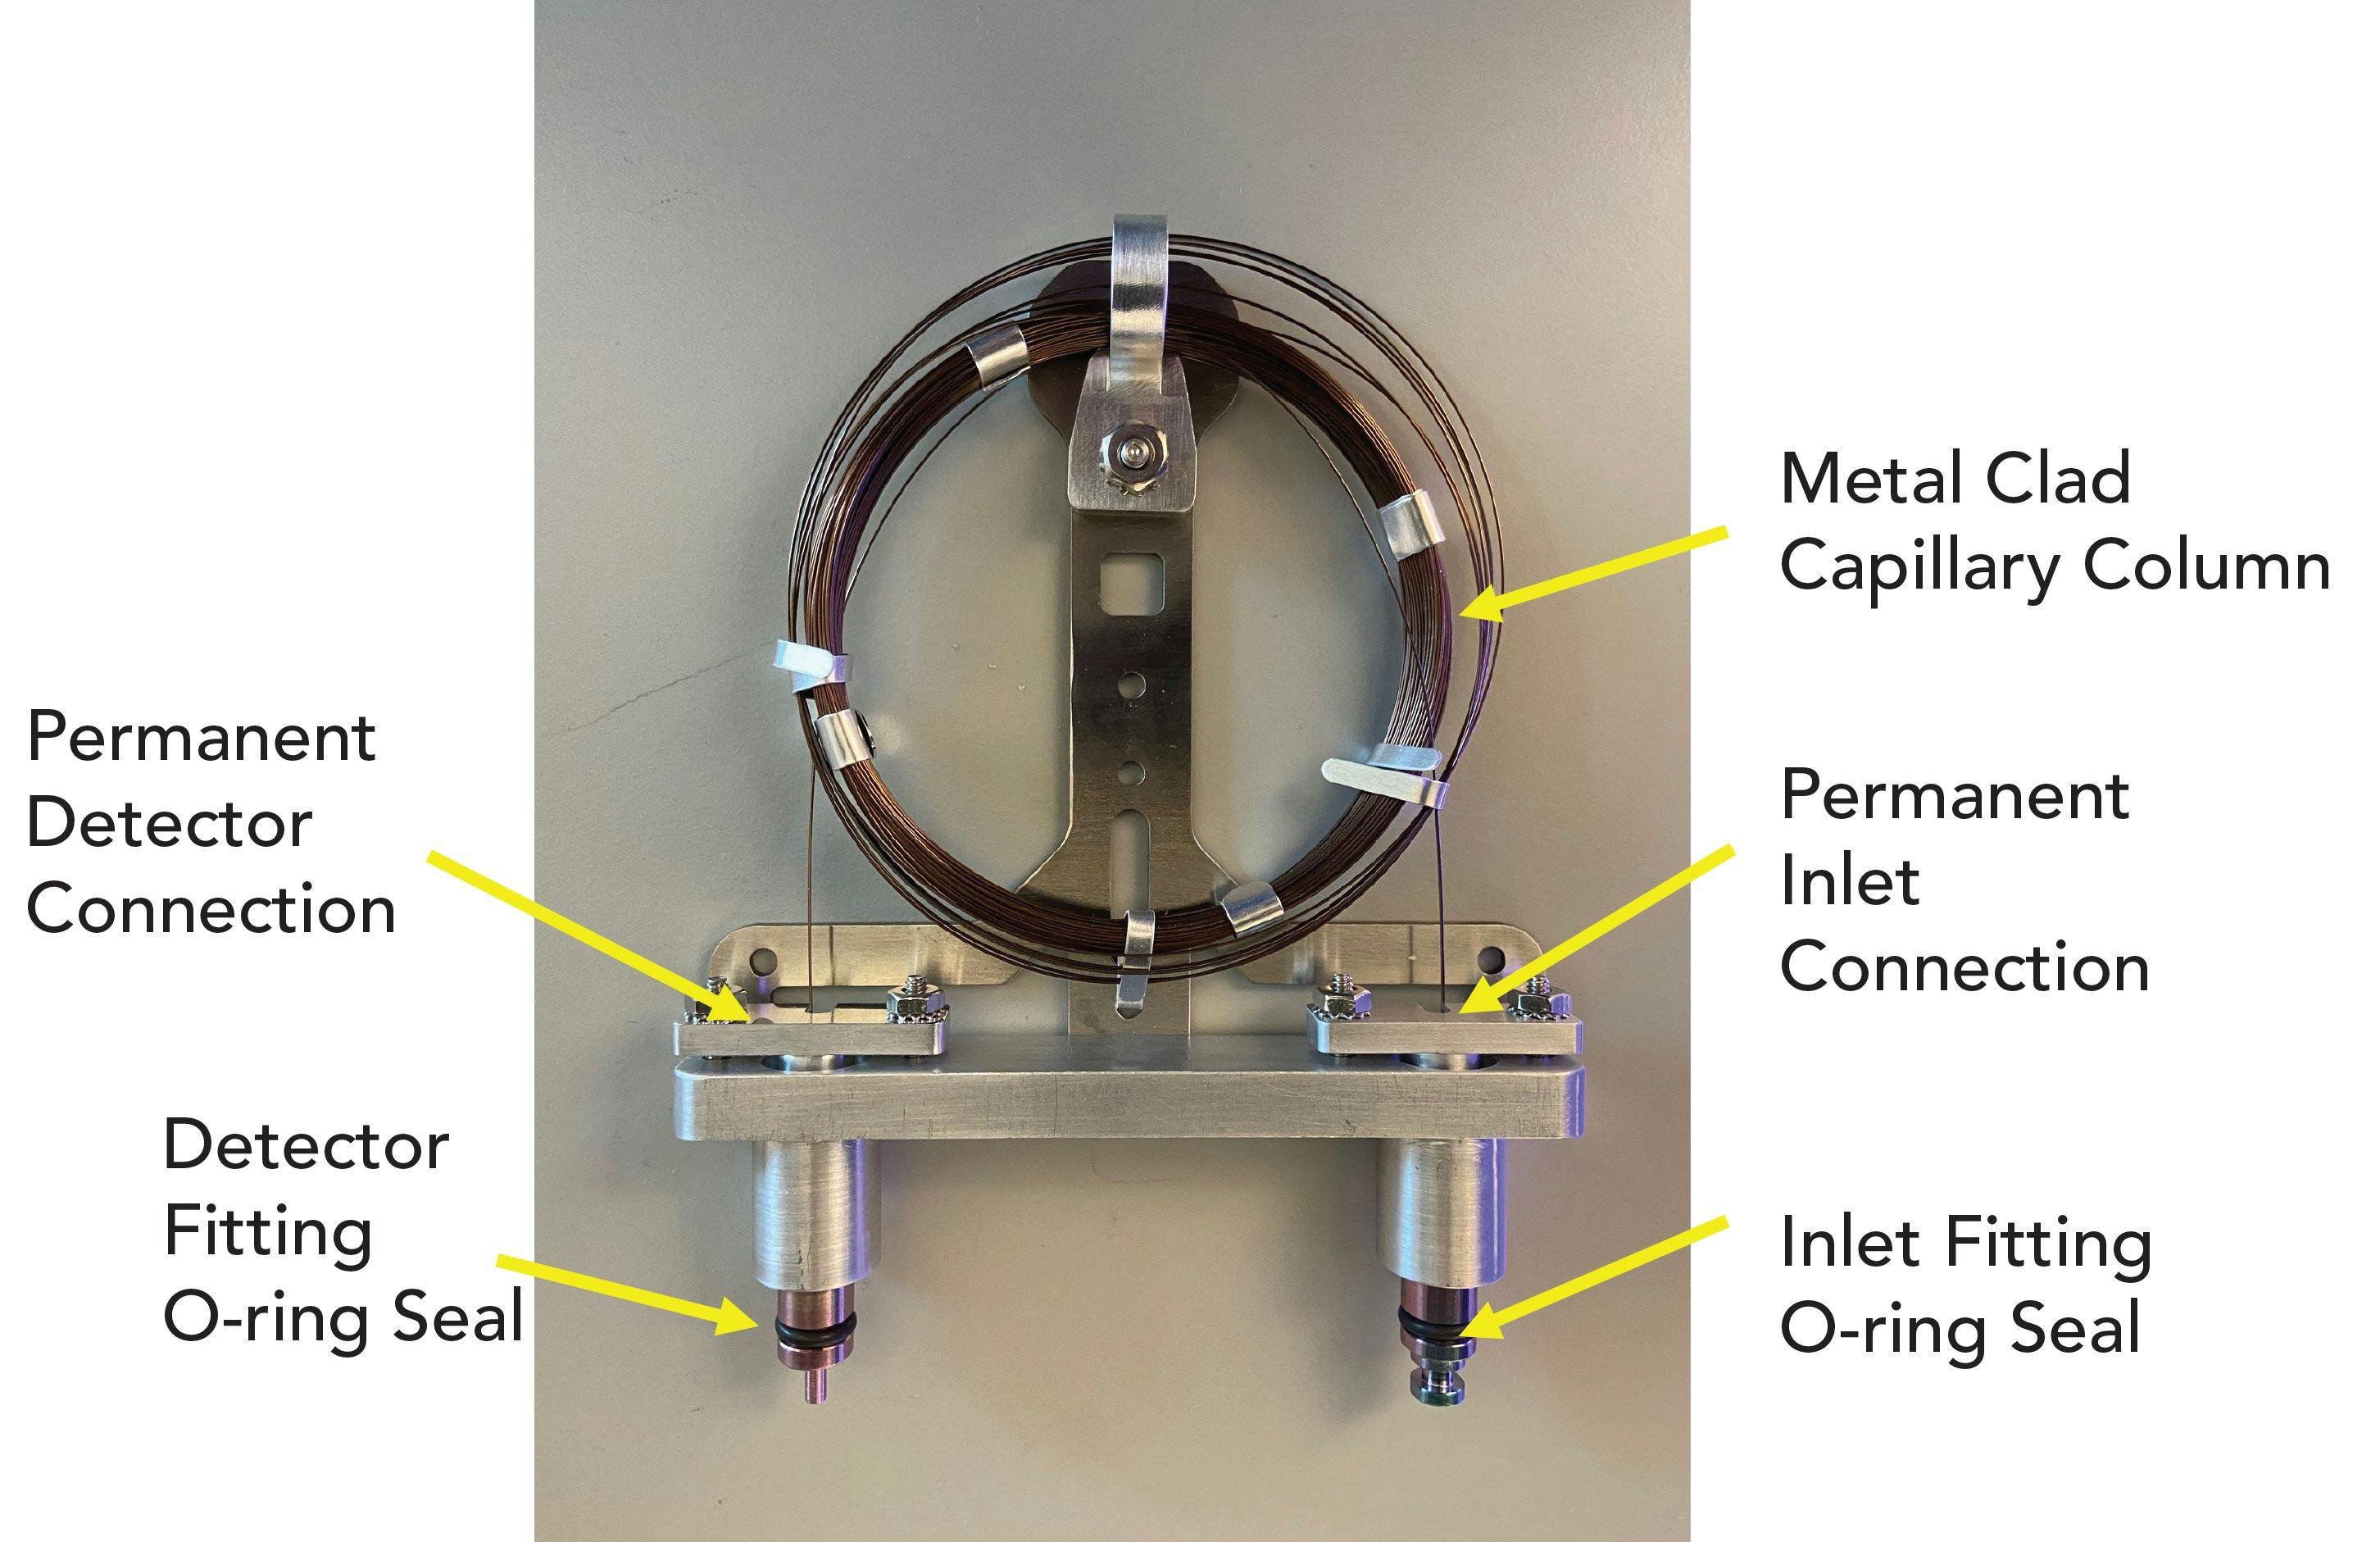 FIGURE 1: Photograph of a column holder with the column from a miniaturized gas chromatograph showing a tightly wound 30 m x 0.32 mm inside diameter column, specialized inlet, and detector connections.